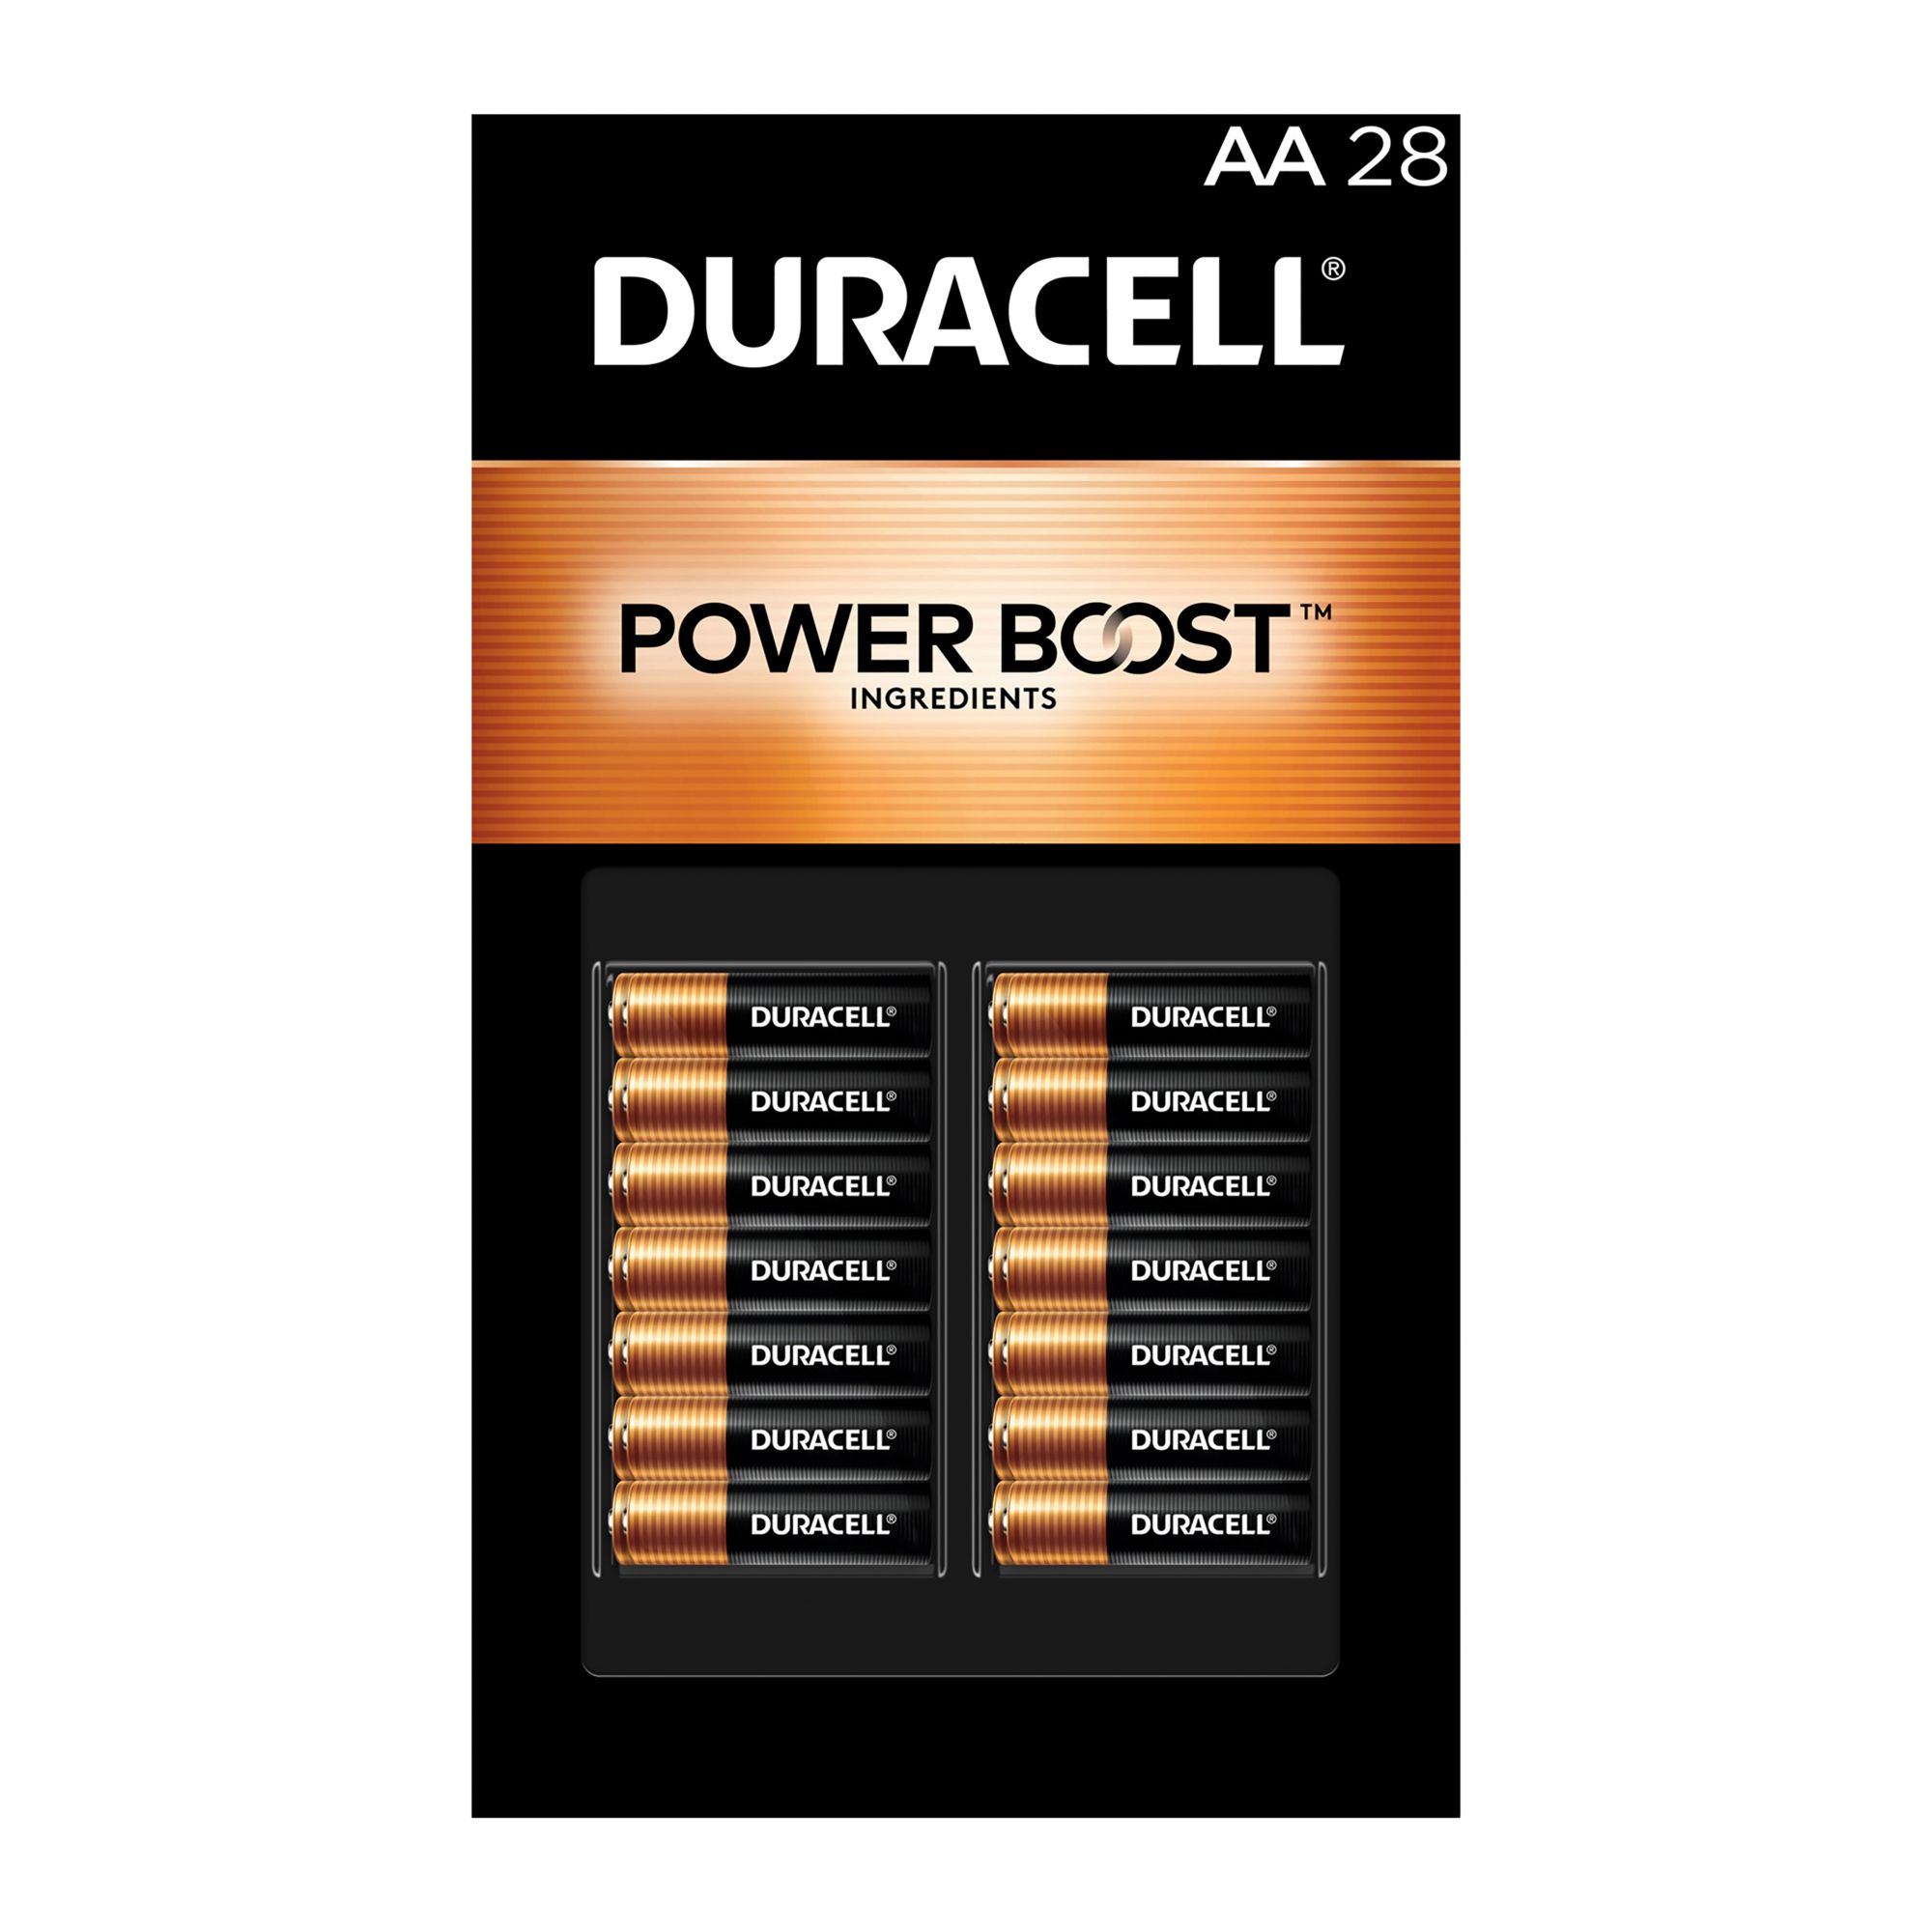 Duracell Coppertop AA Batteries, 28 ct.